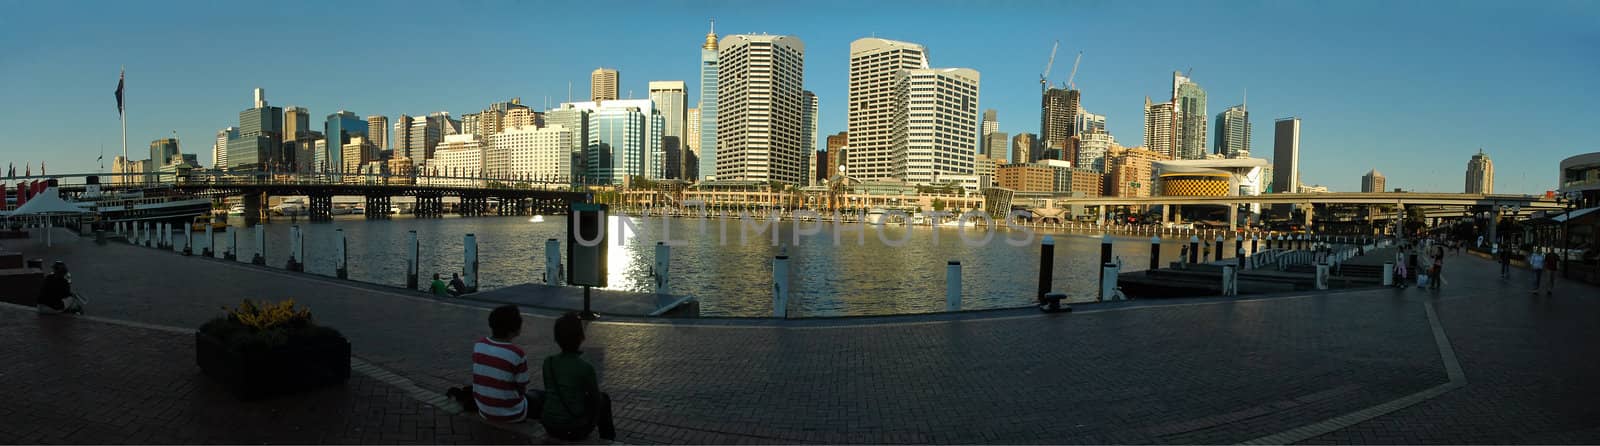 Darling Harbour by rorem